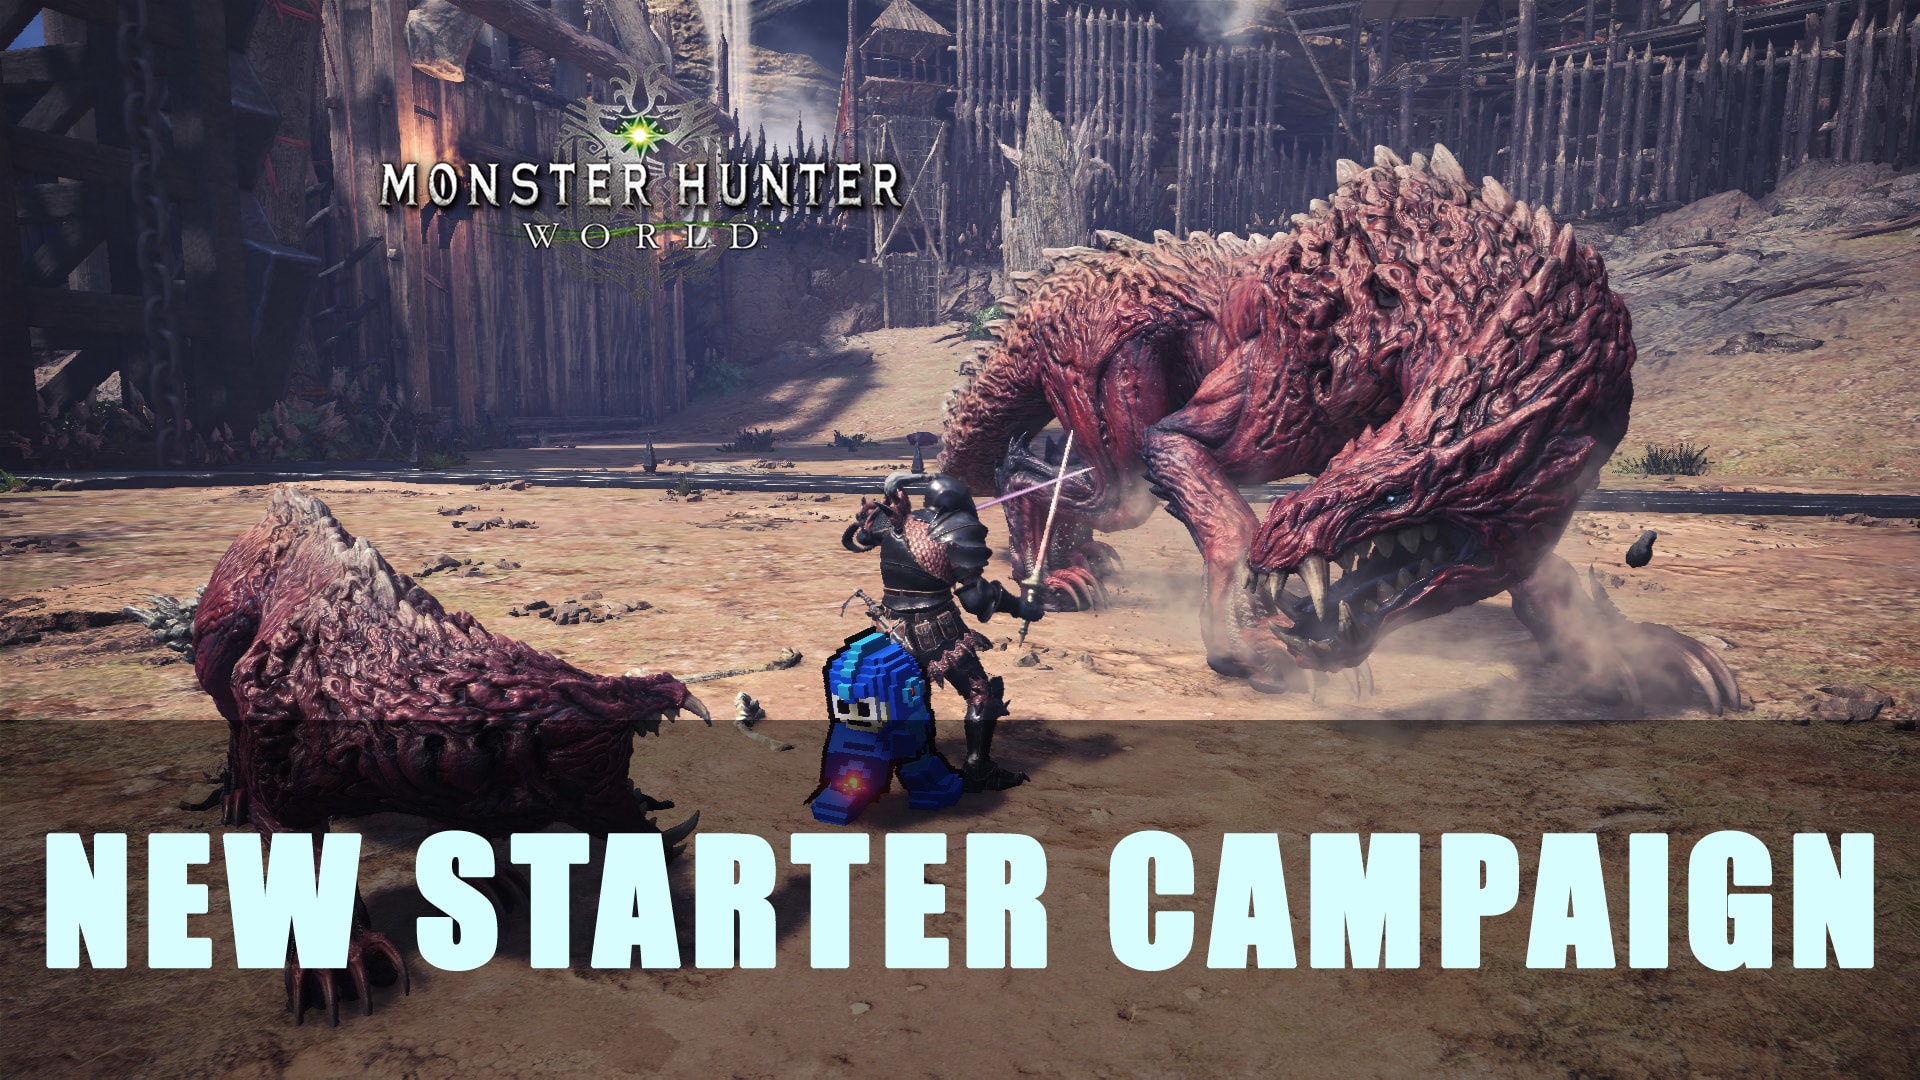 MHW: New Starter Campaign Details - Fextralife